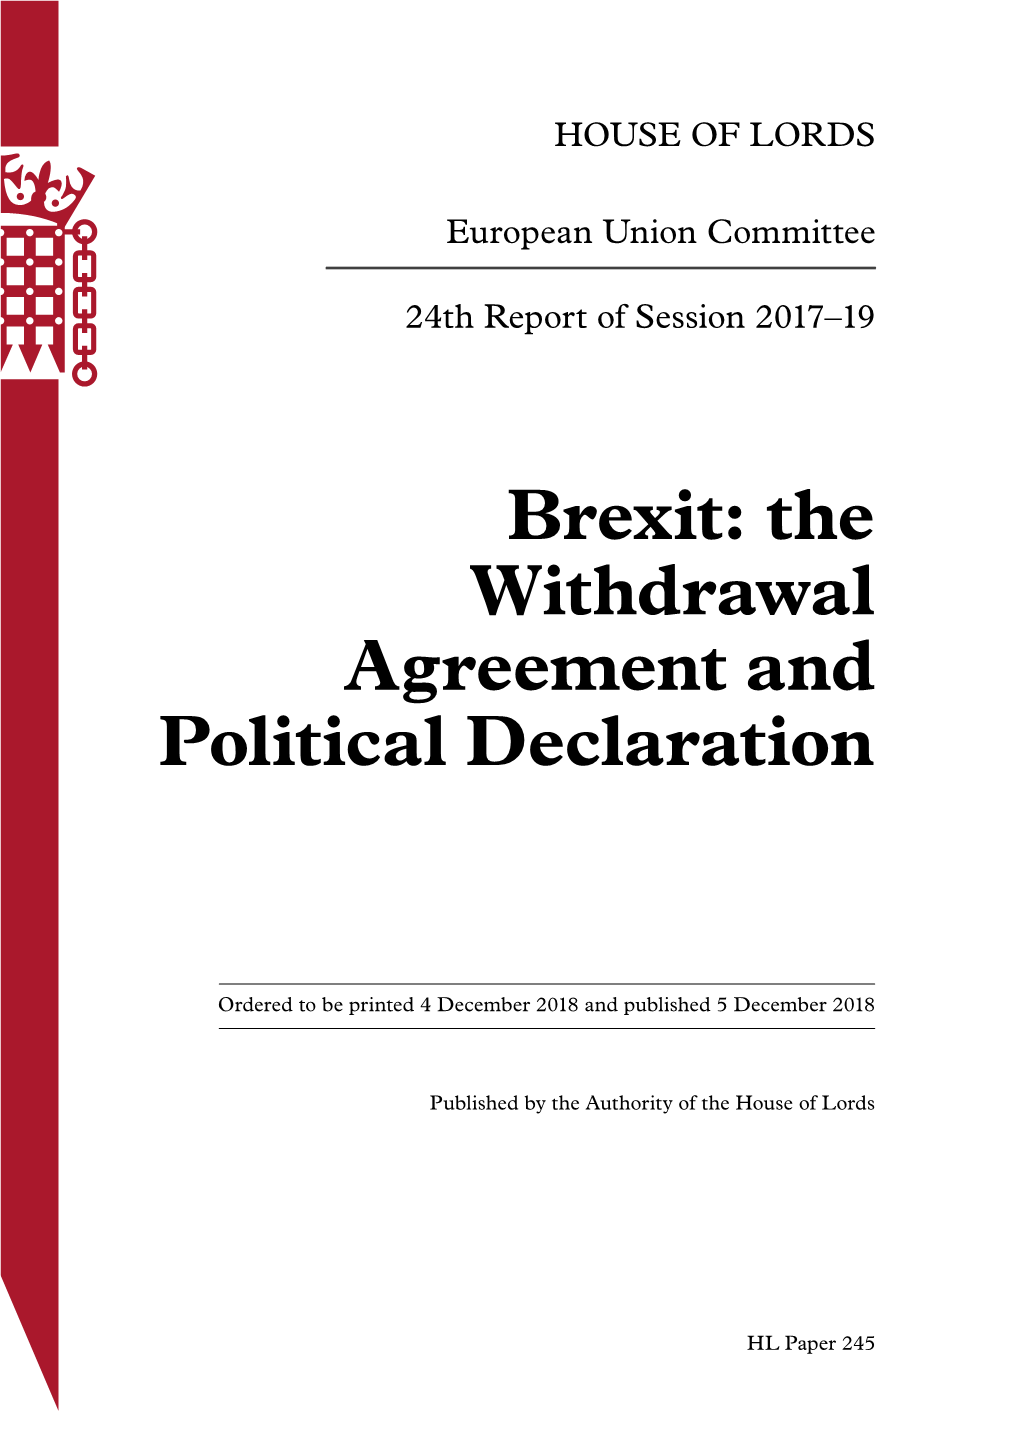 Brexit: the Withdrawal Agreement and Political Declaration